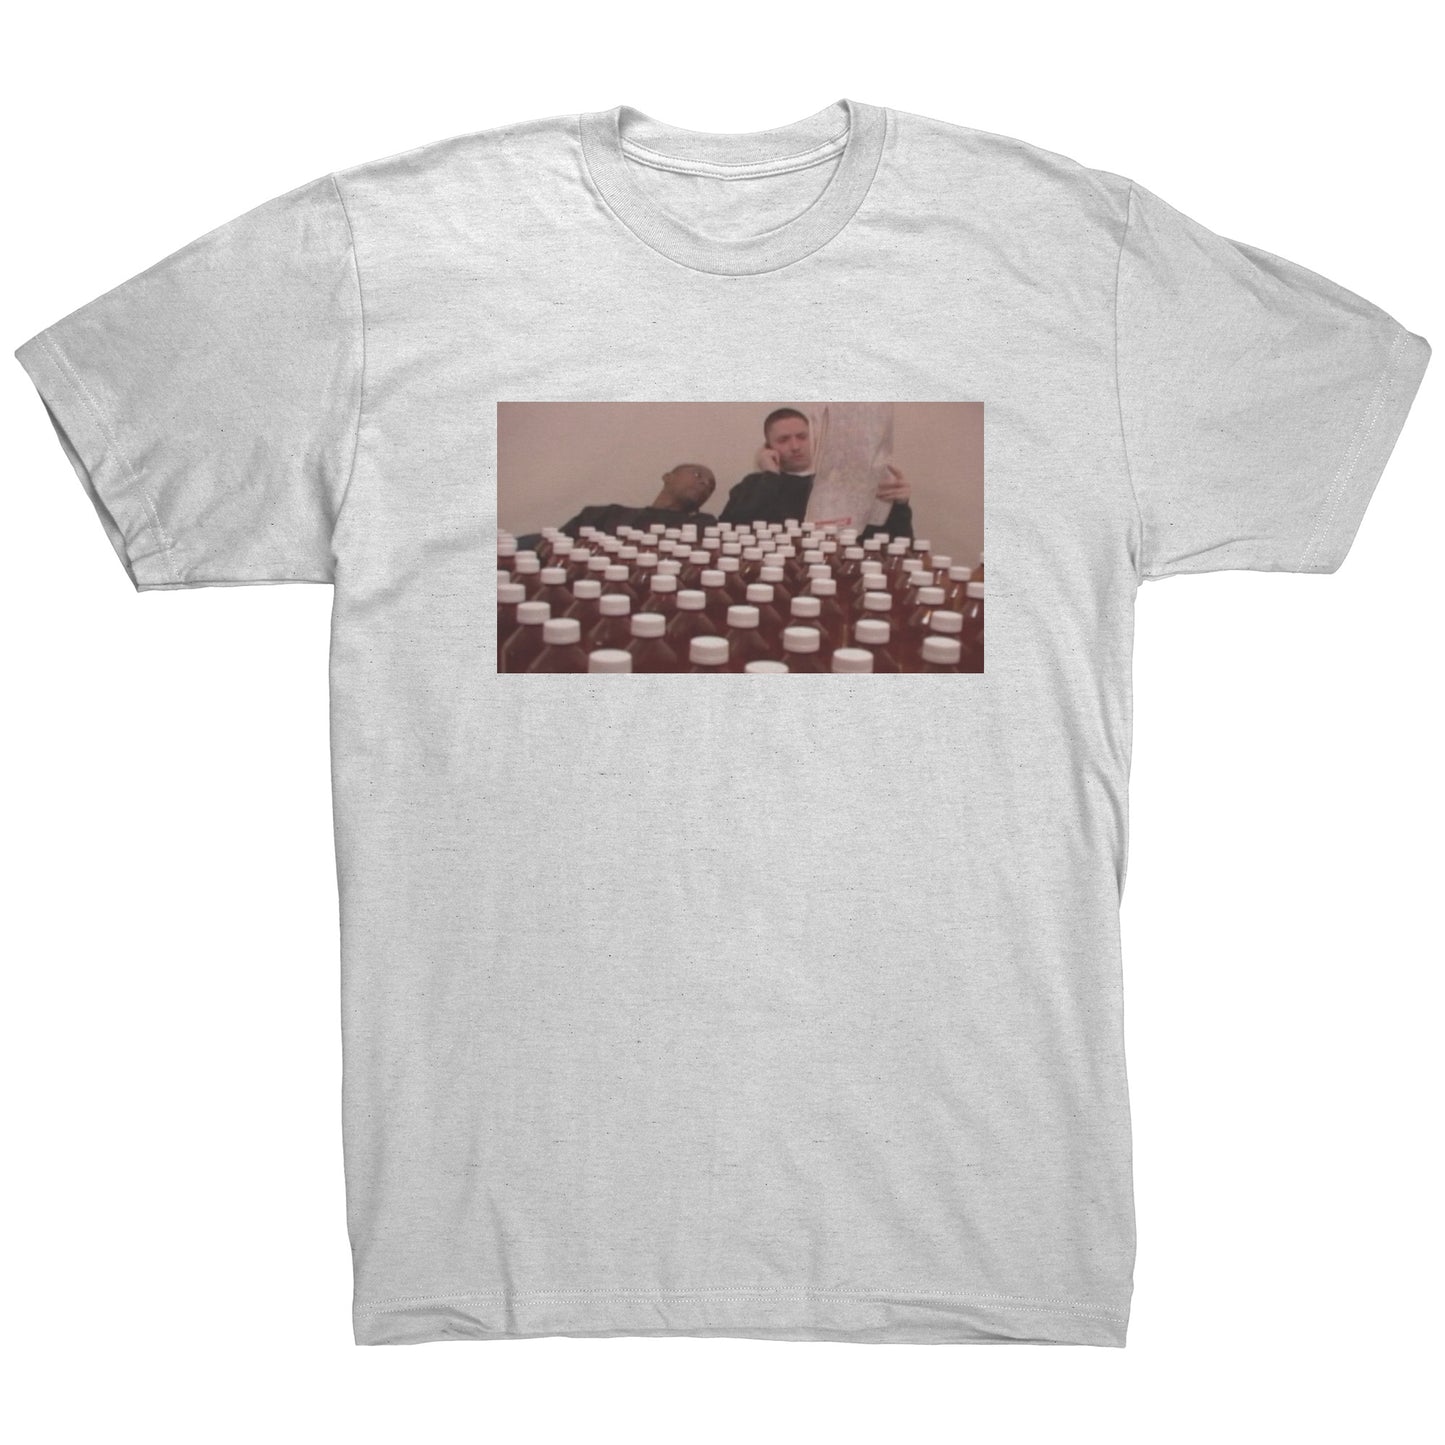 Trust None Tee Shirt - Sippin on Syrup